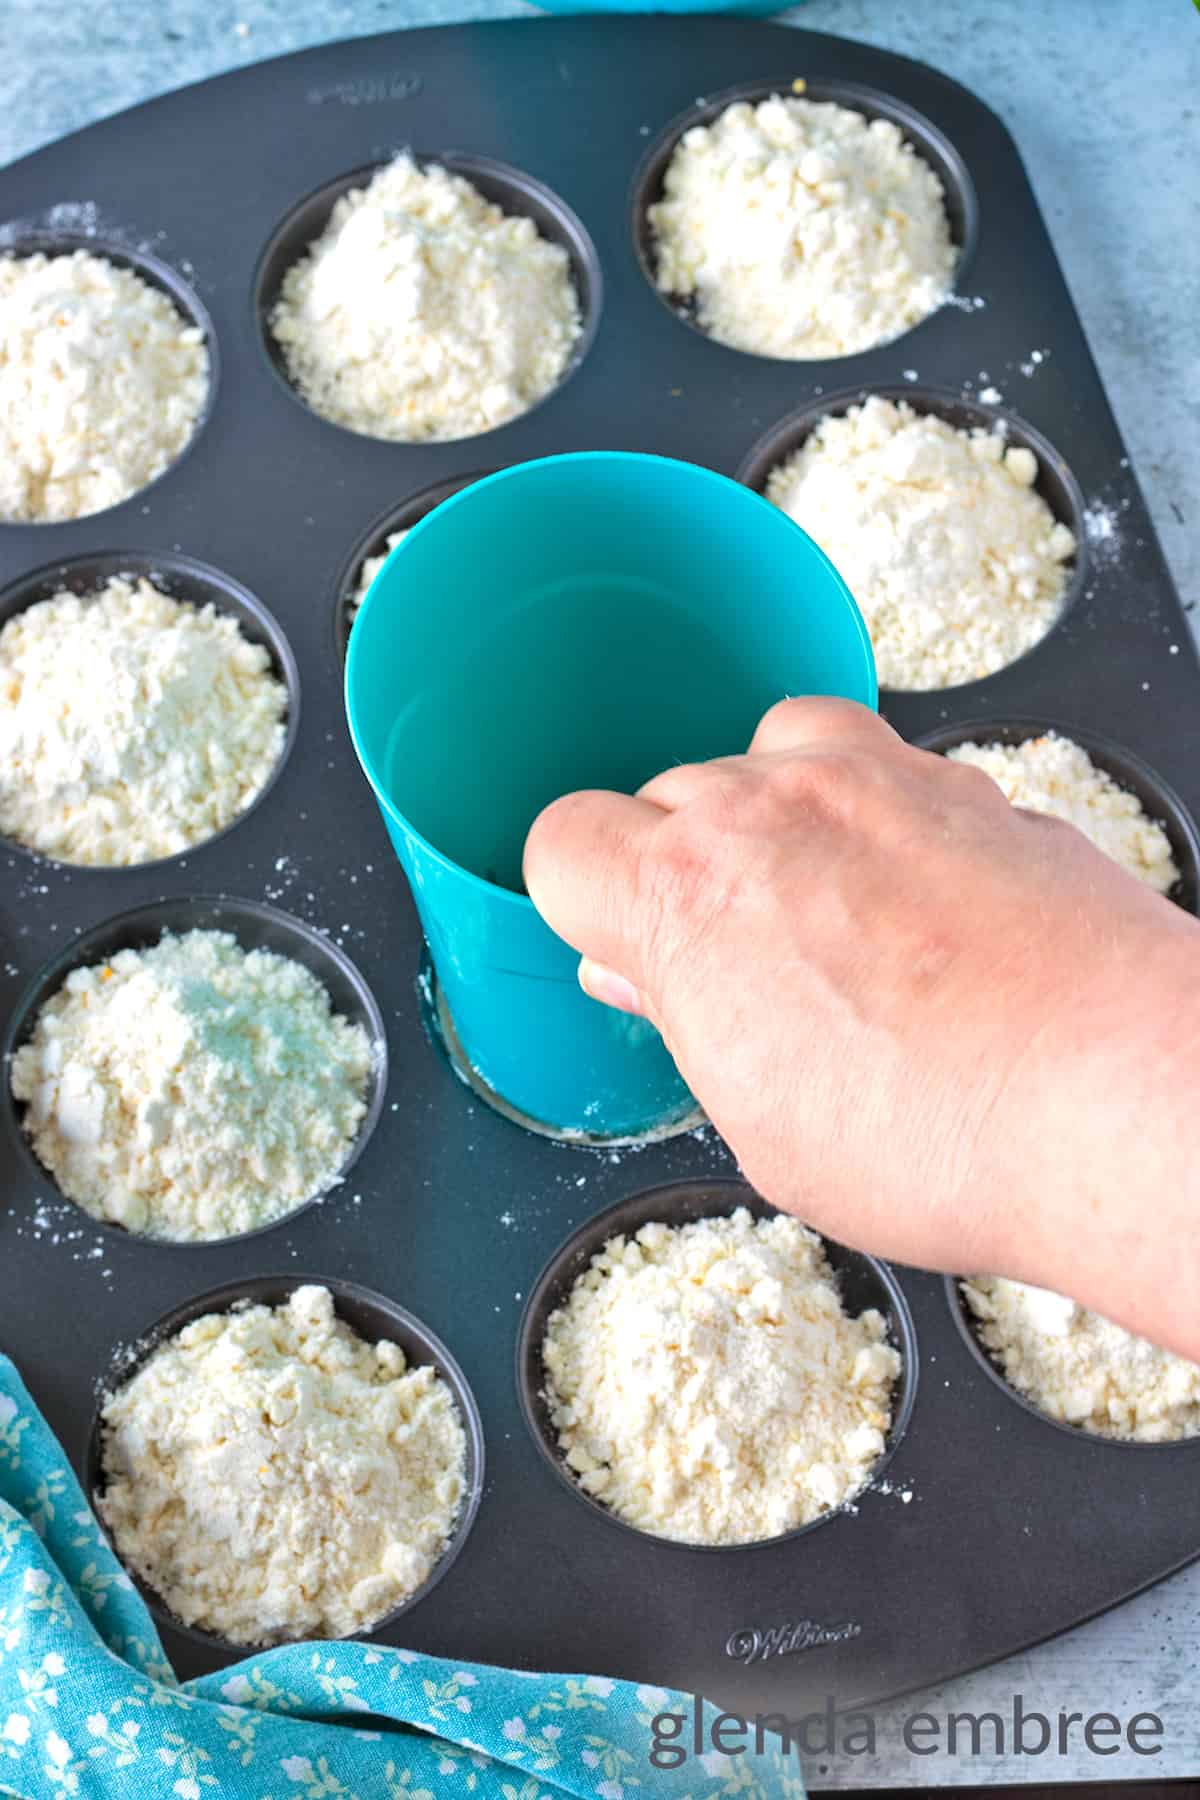 Using the bottom of a cup to press the shortbread cookie dough crumbles into a solid disk.